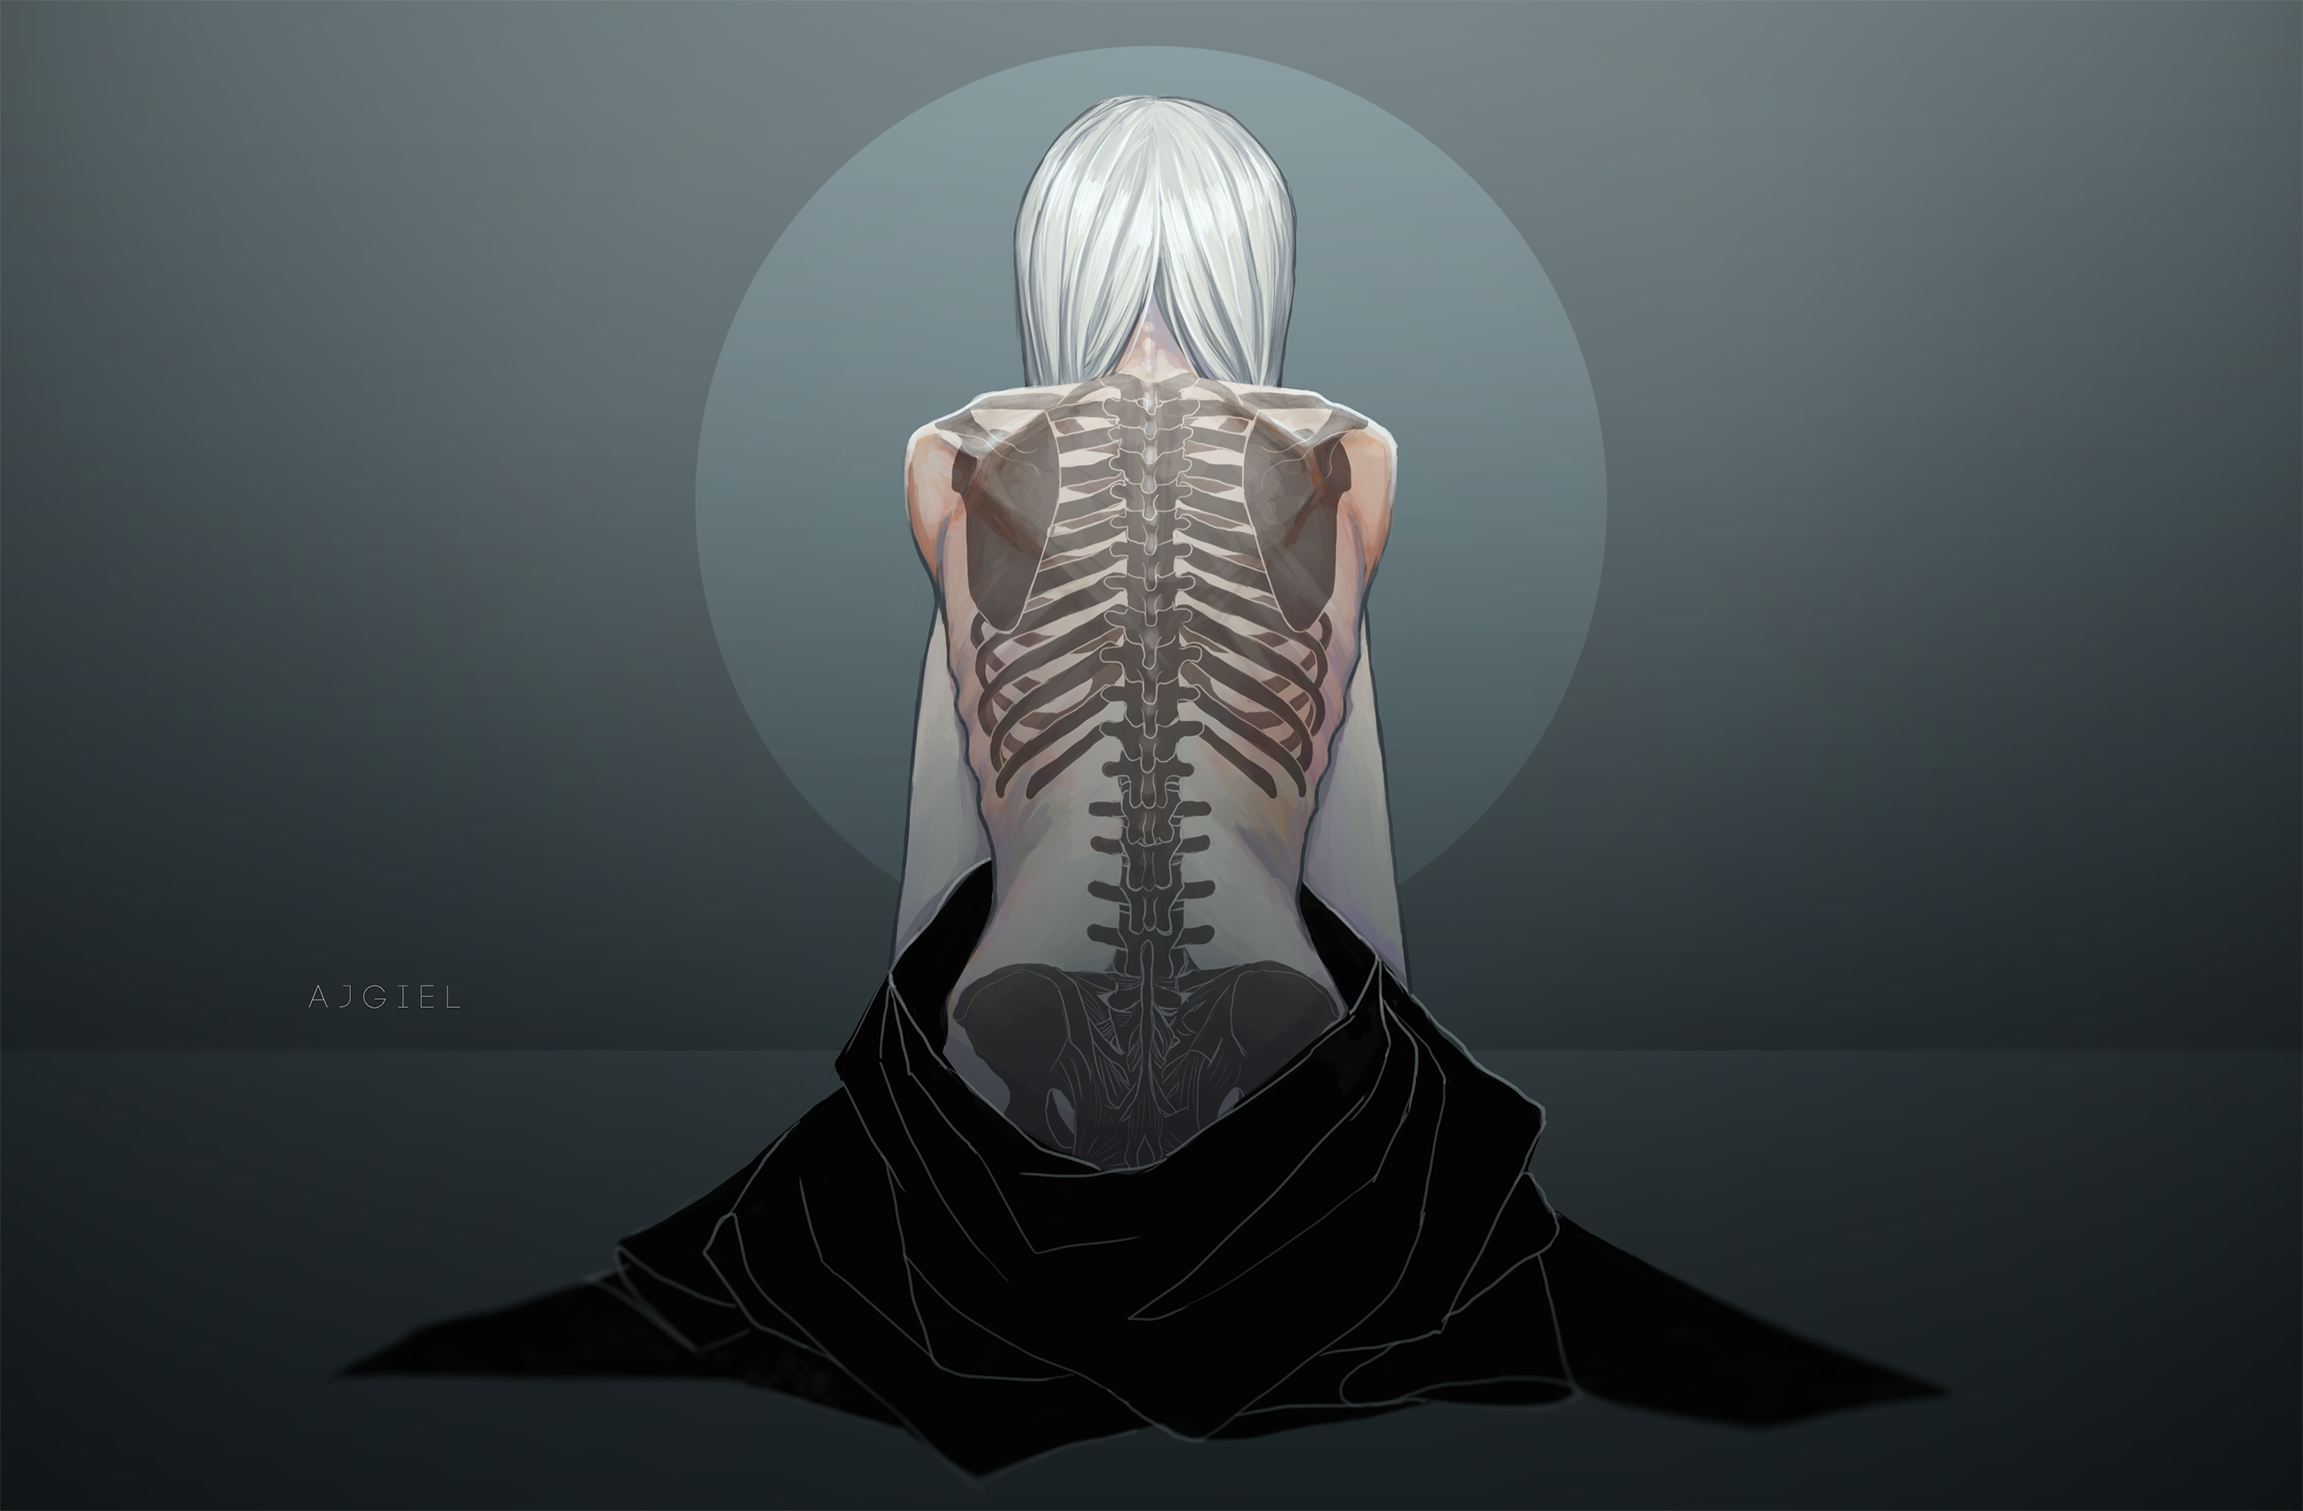 living_dead_by_ajgiel-d847qy2.png